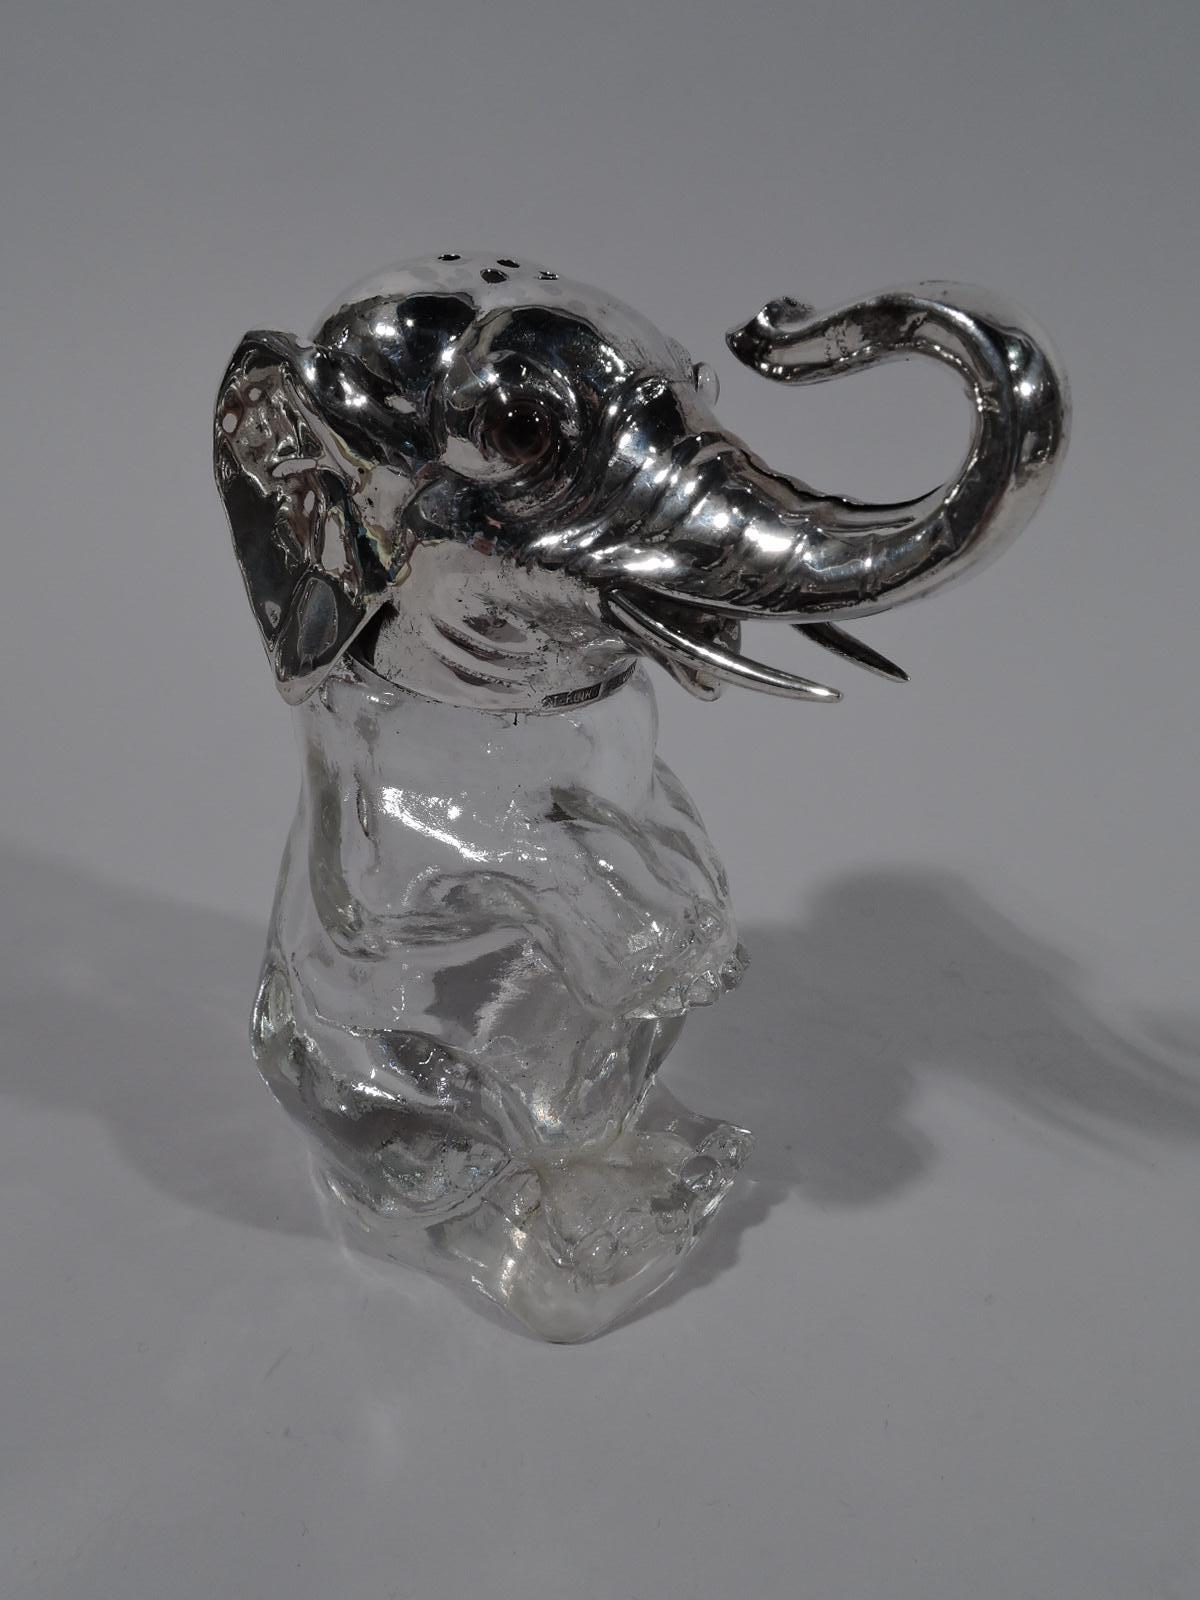 Antique sterling silver and clear glass sugar caster, circa 1910. Body in clear glass and head in sterling silver. Elephant is seated with straight hind legs and dangling forelegs. Ears are flapped back and trunk is turned up. Fine details,